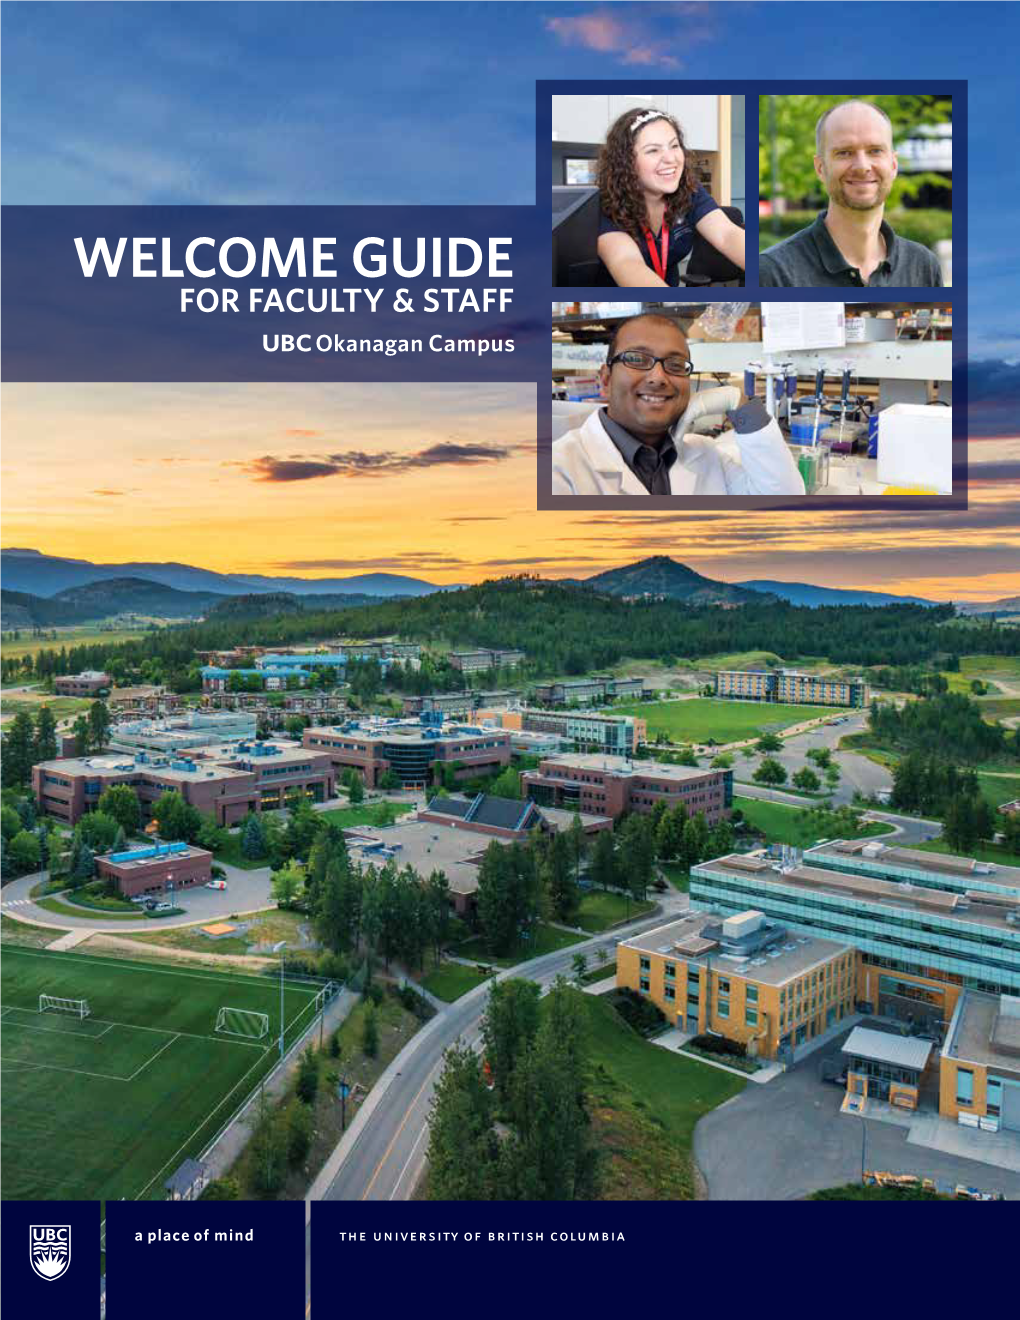 Welcome Guide for Faculty & Staff Contents